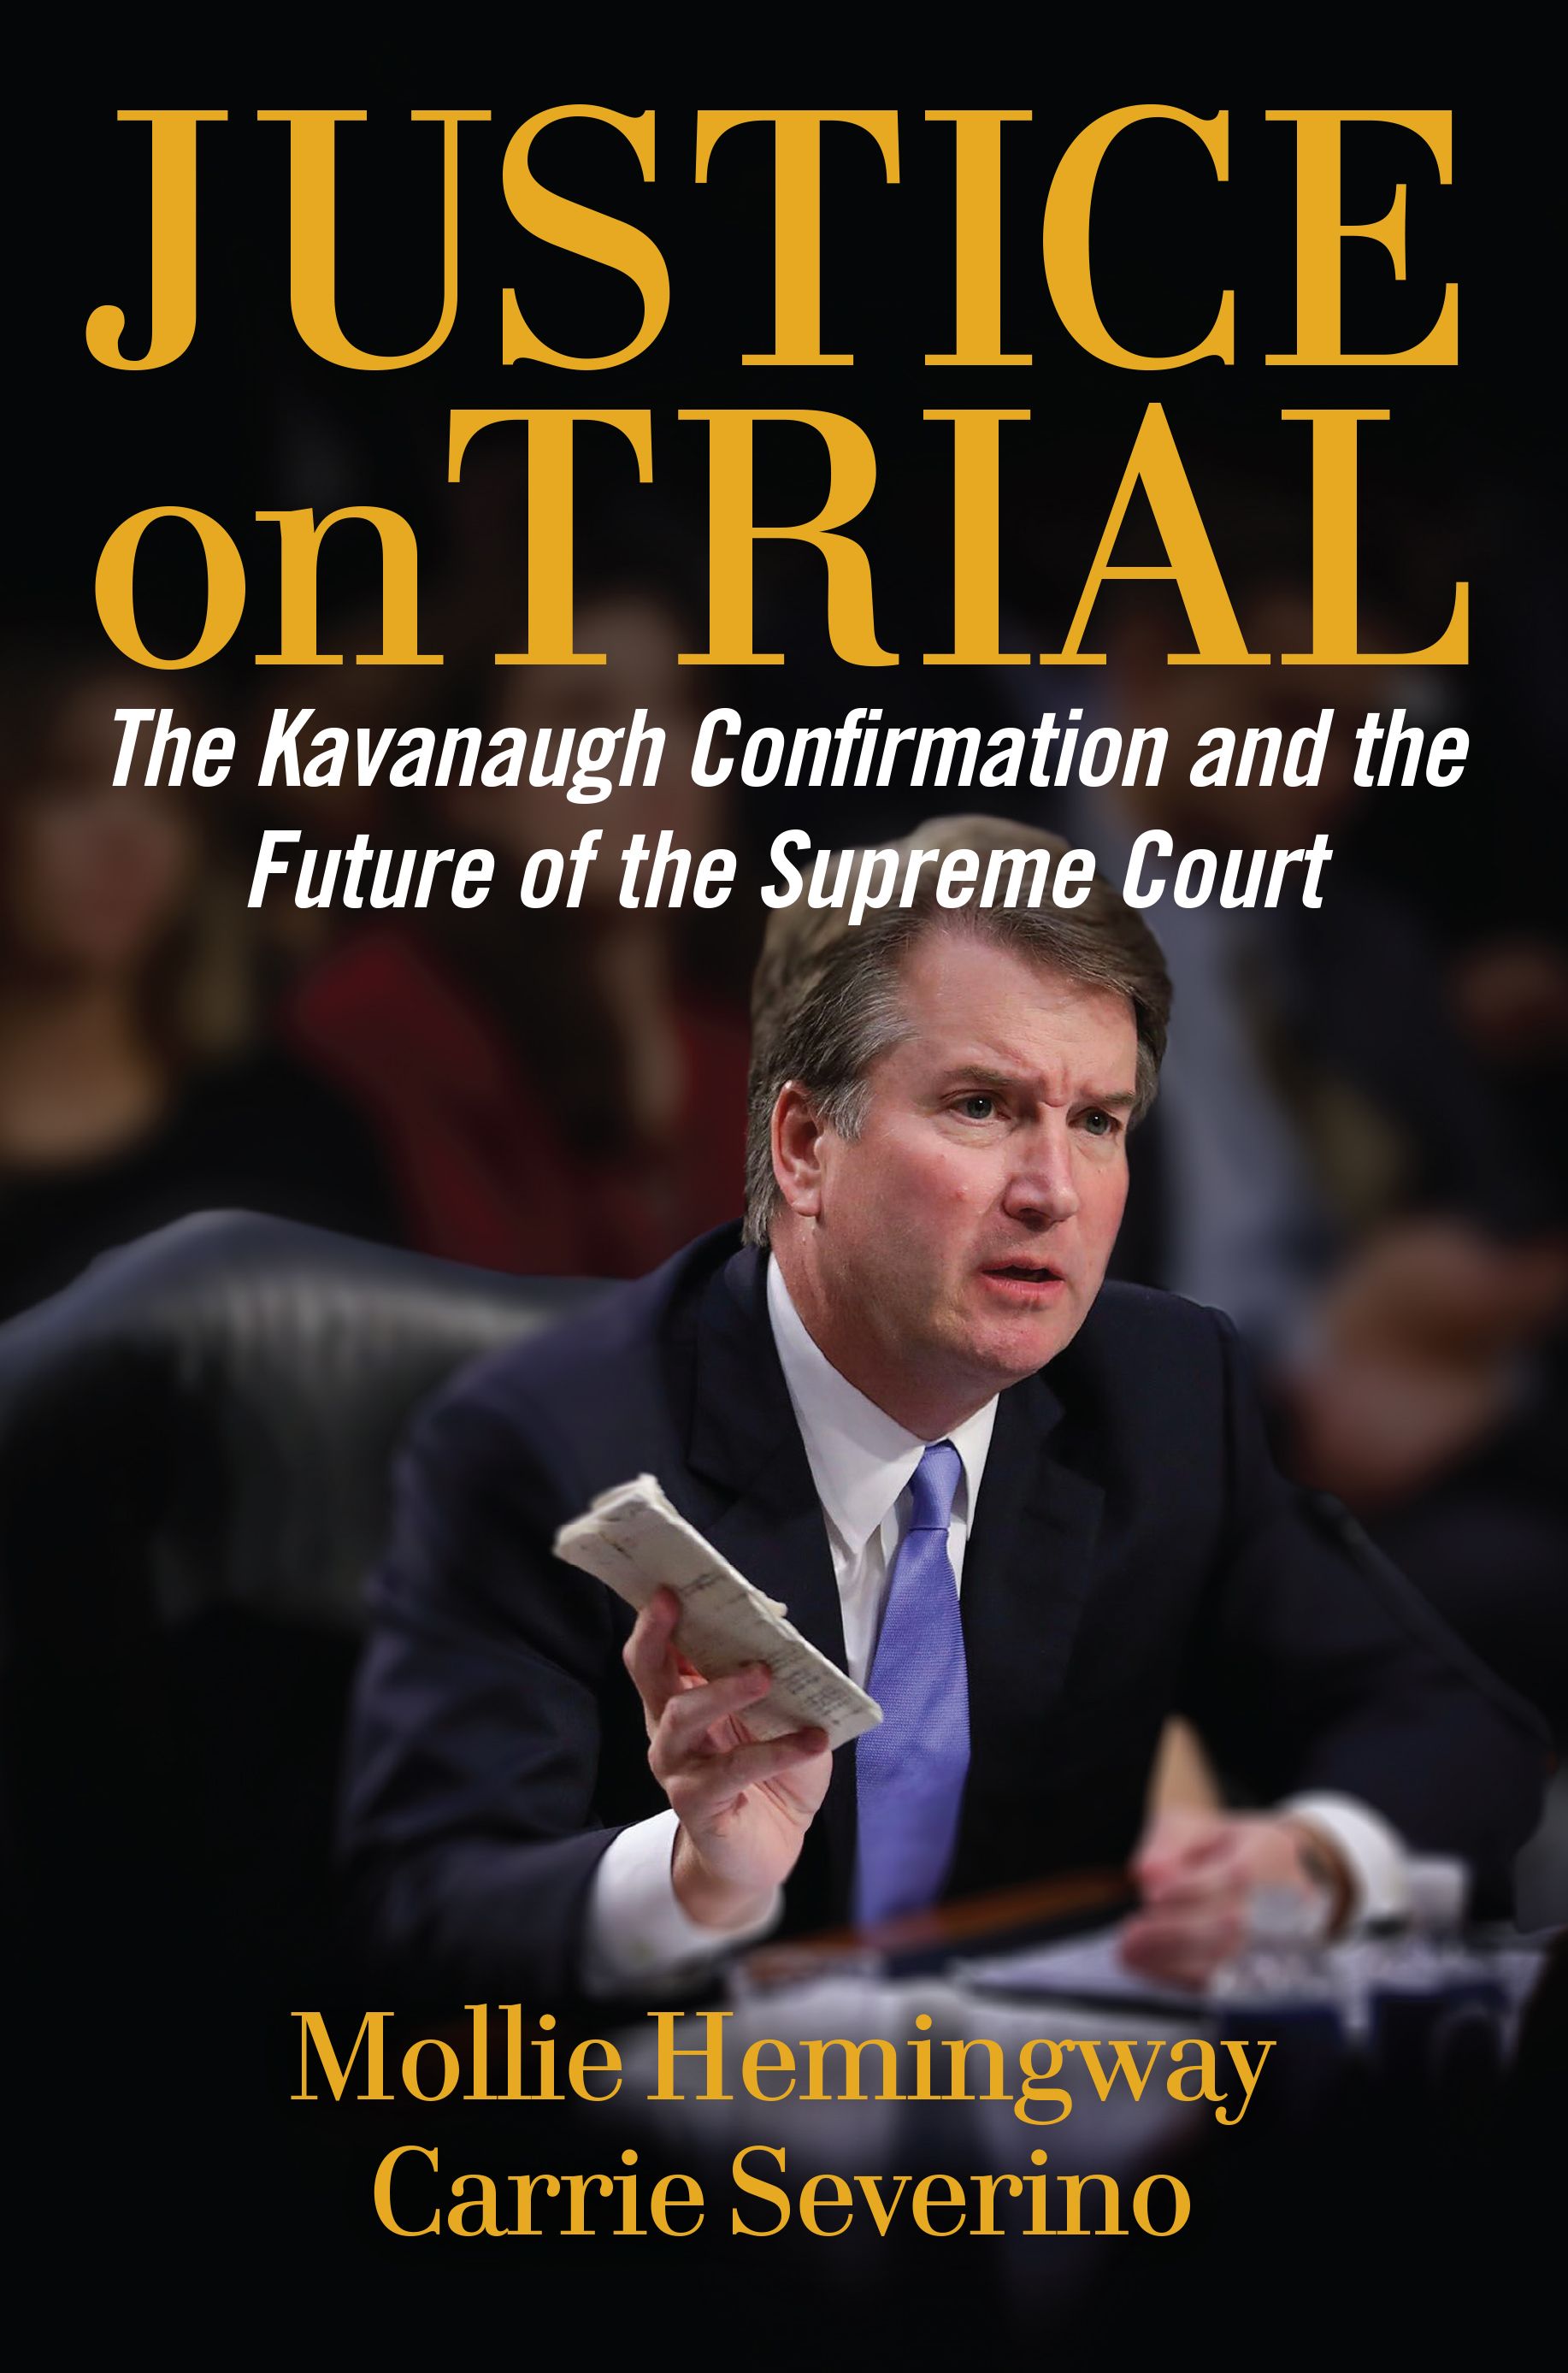 Cover for "Justice on trial"